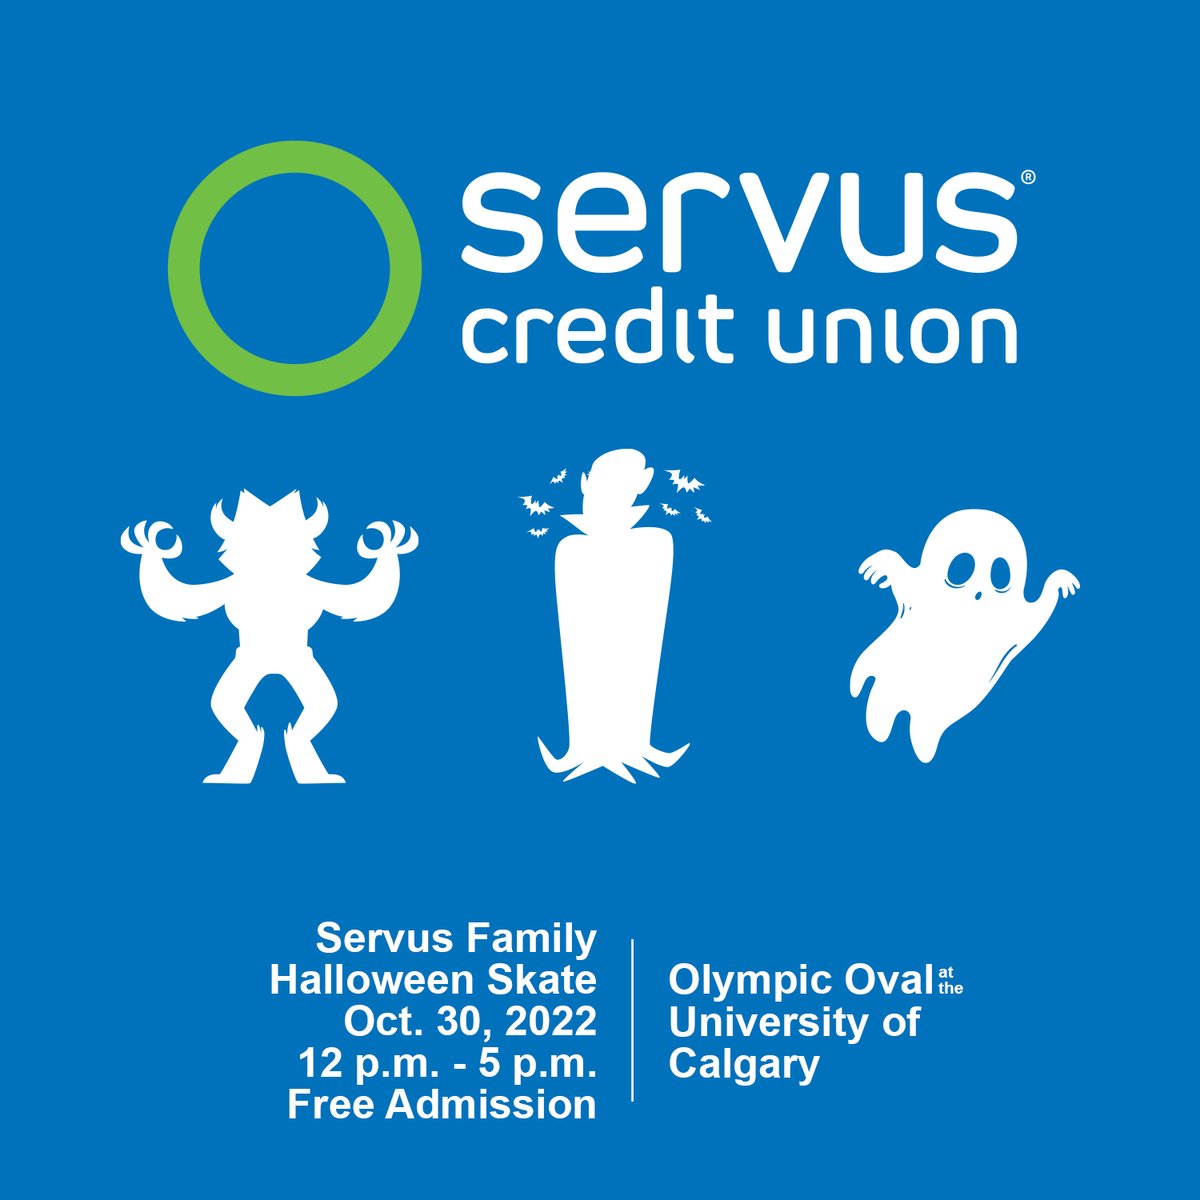 We are looking forward to hosting all of Calgary's little ghouls and ghosts, goblins and ghastly creatures for the @ServusCU SERVUS FAMILY HALLOWEEN SKATE. October 30th 12 Noon - 5:00 p.m. Admission: Free Link: bit.ly/3MFxQap #halloween #halloweenevent